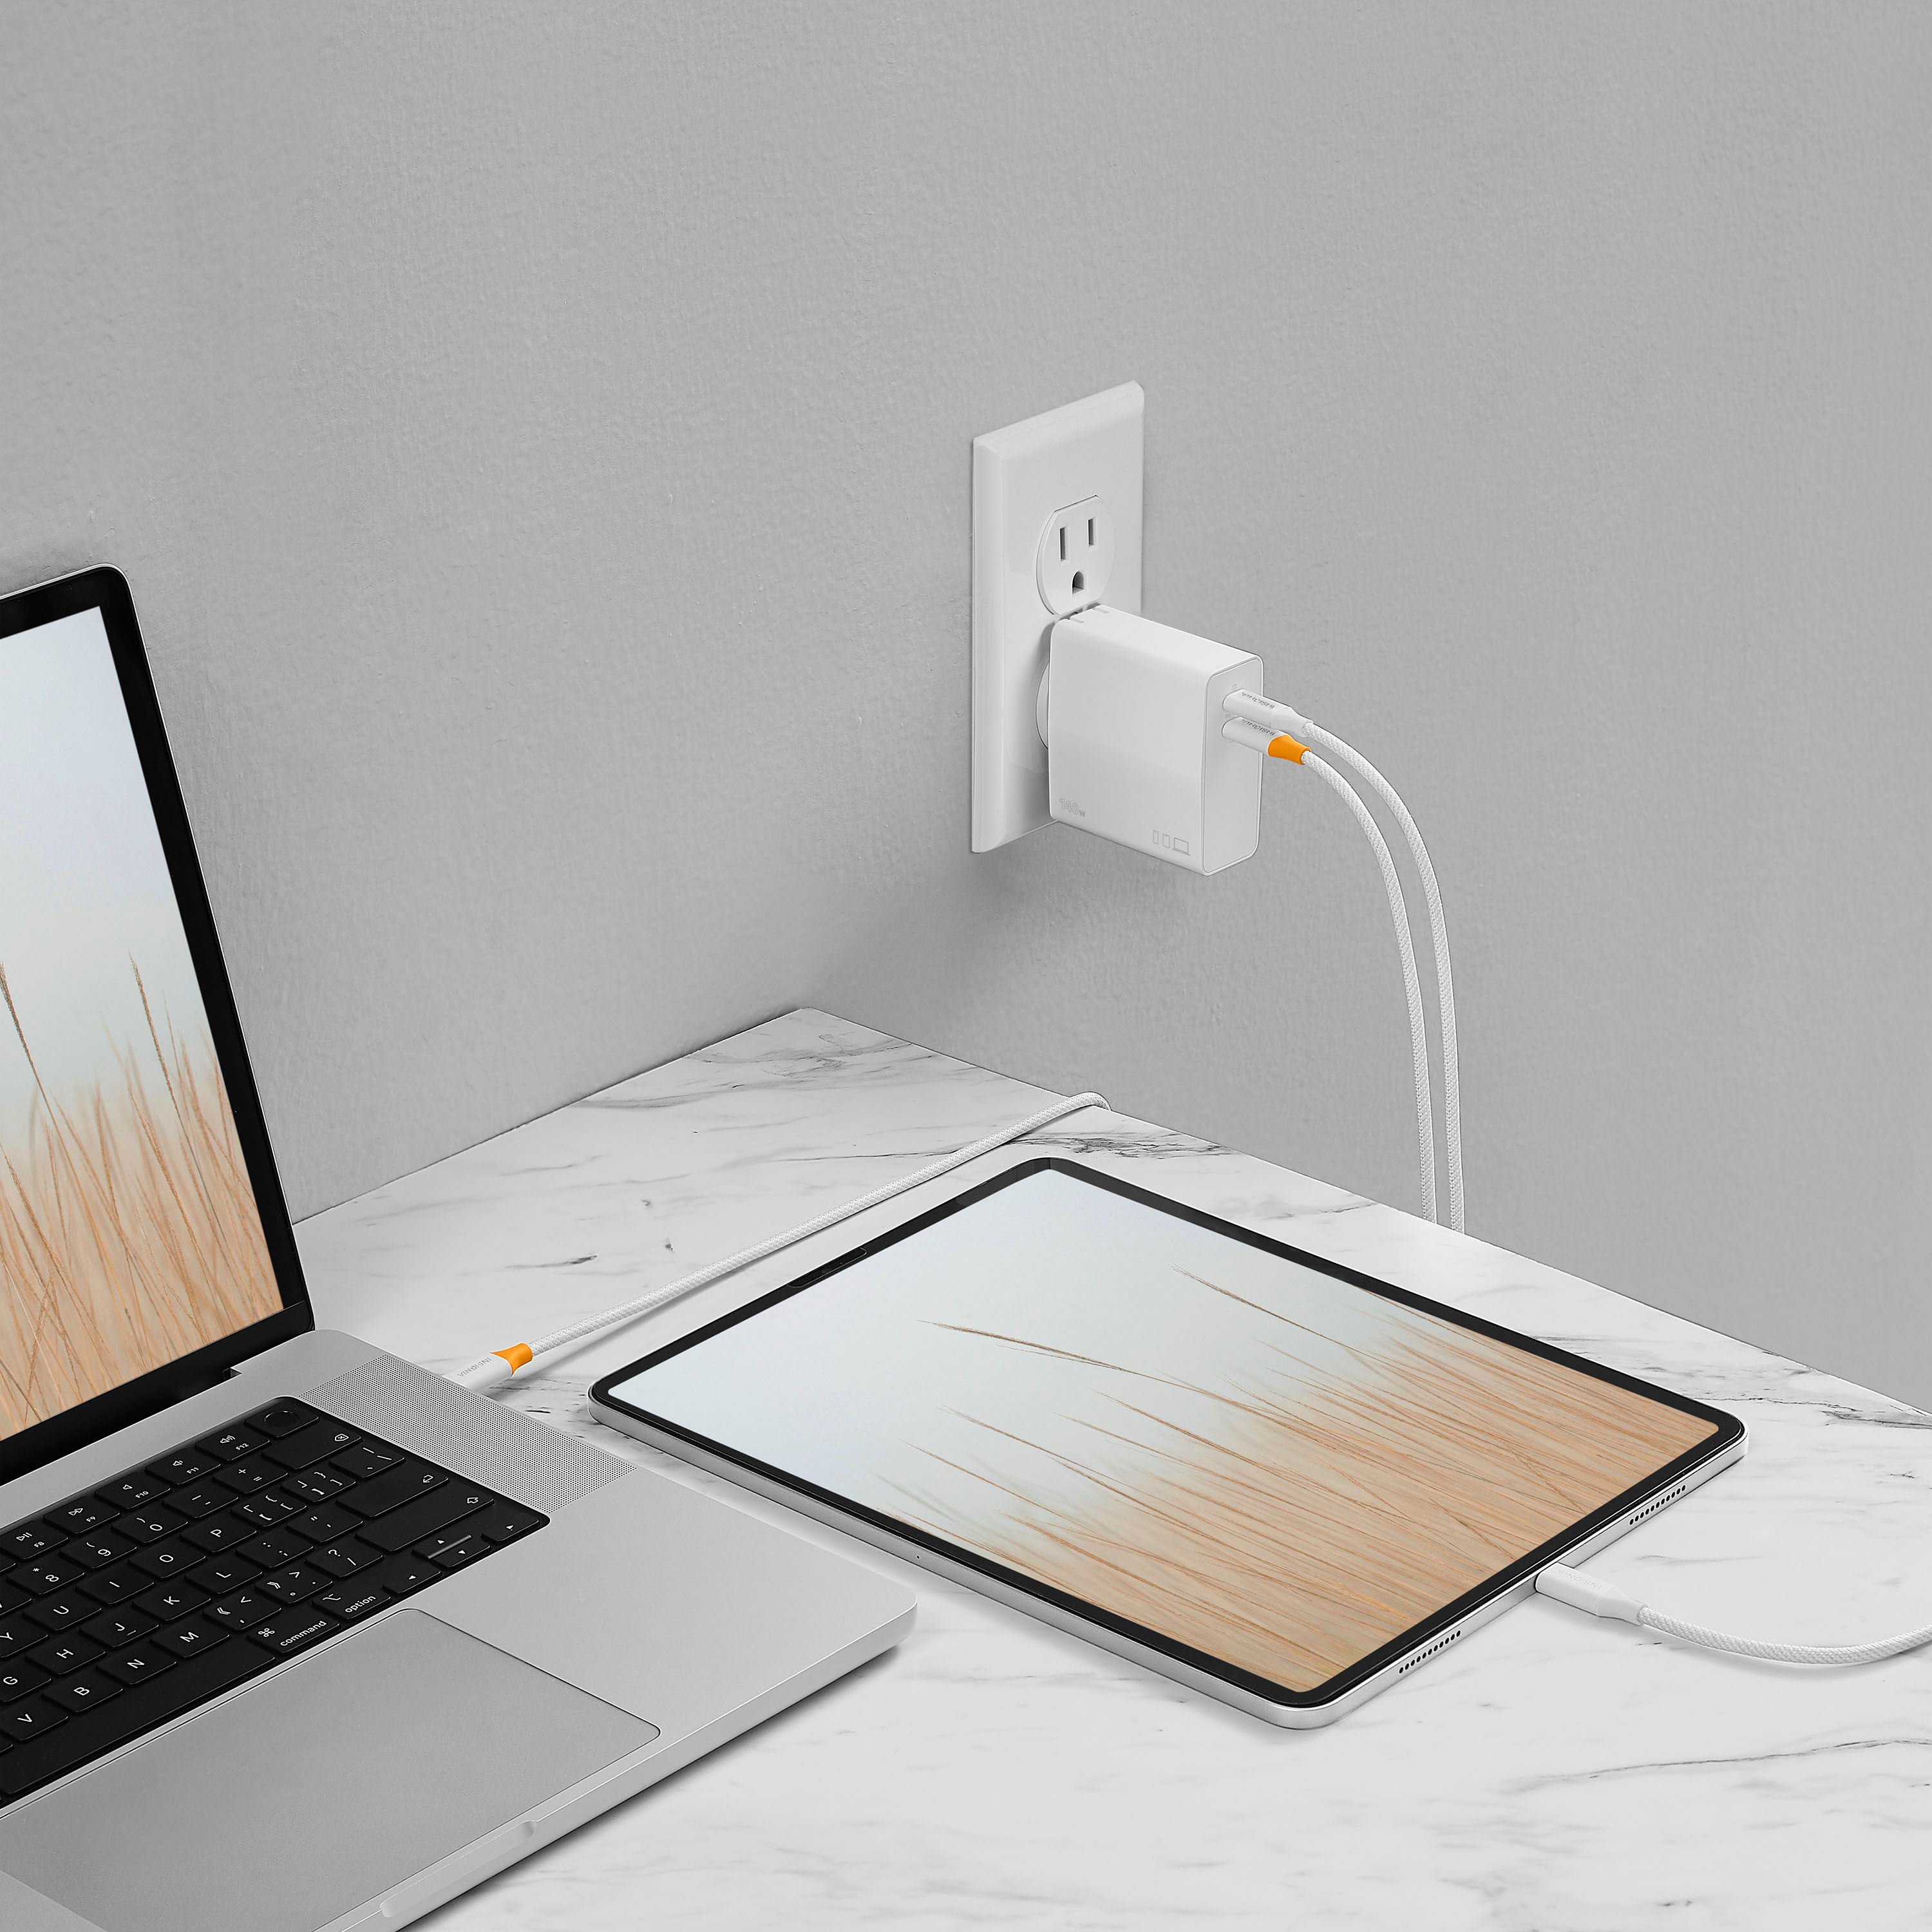 Insignia 140W Dual Port USB-C Compact Wall Charger Kit for MacBook Pro & Other Devices - White - 1 Each